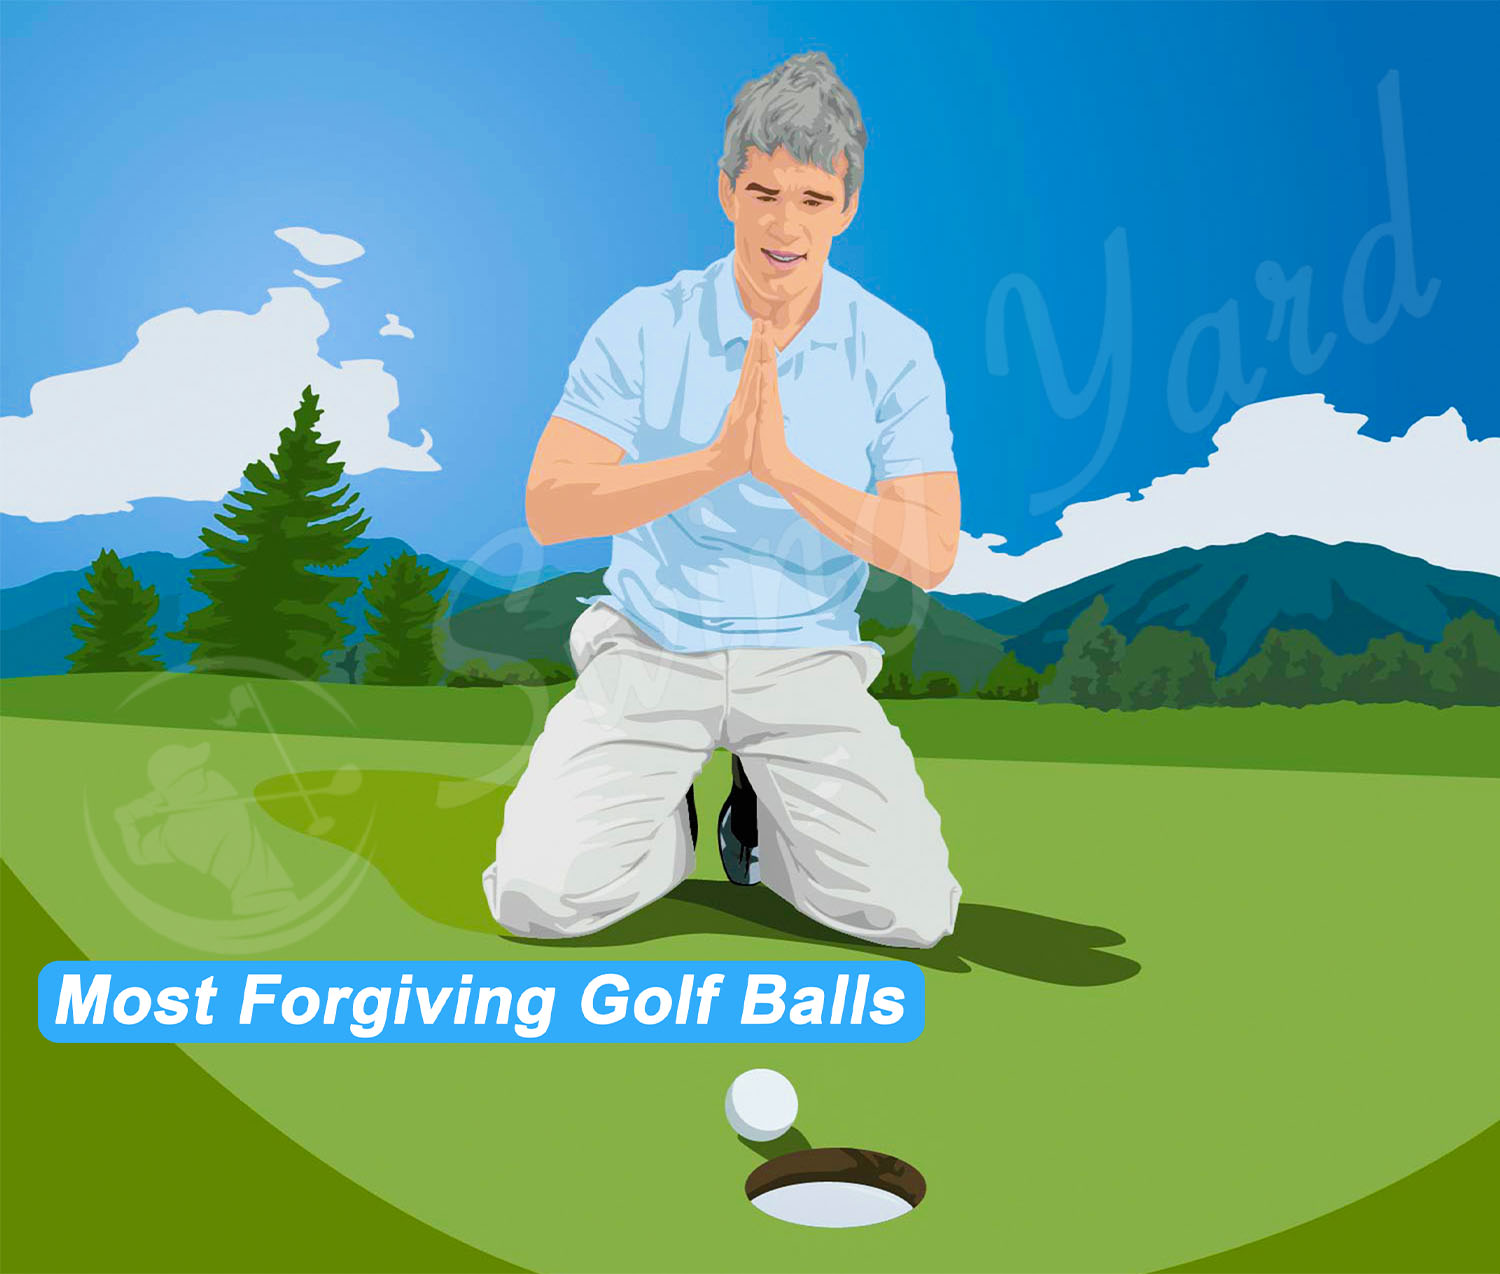 A guy asking a golf ball for forgiveness